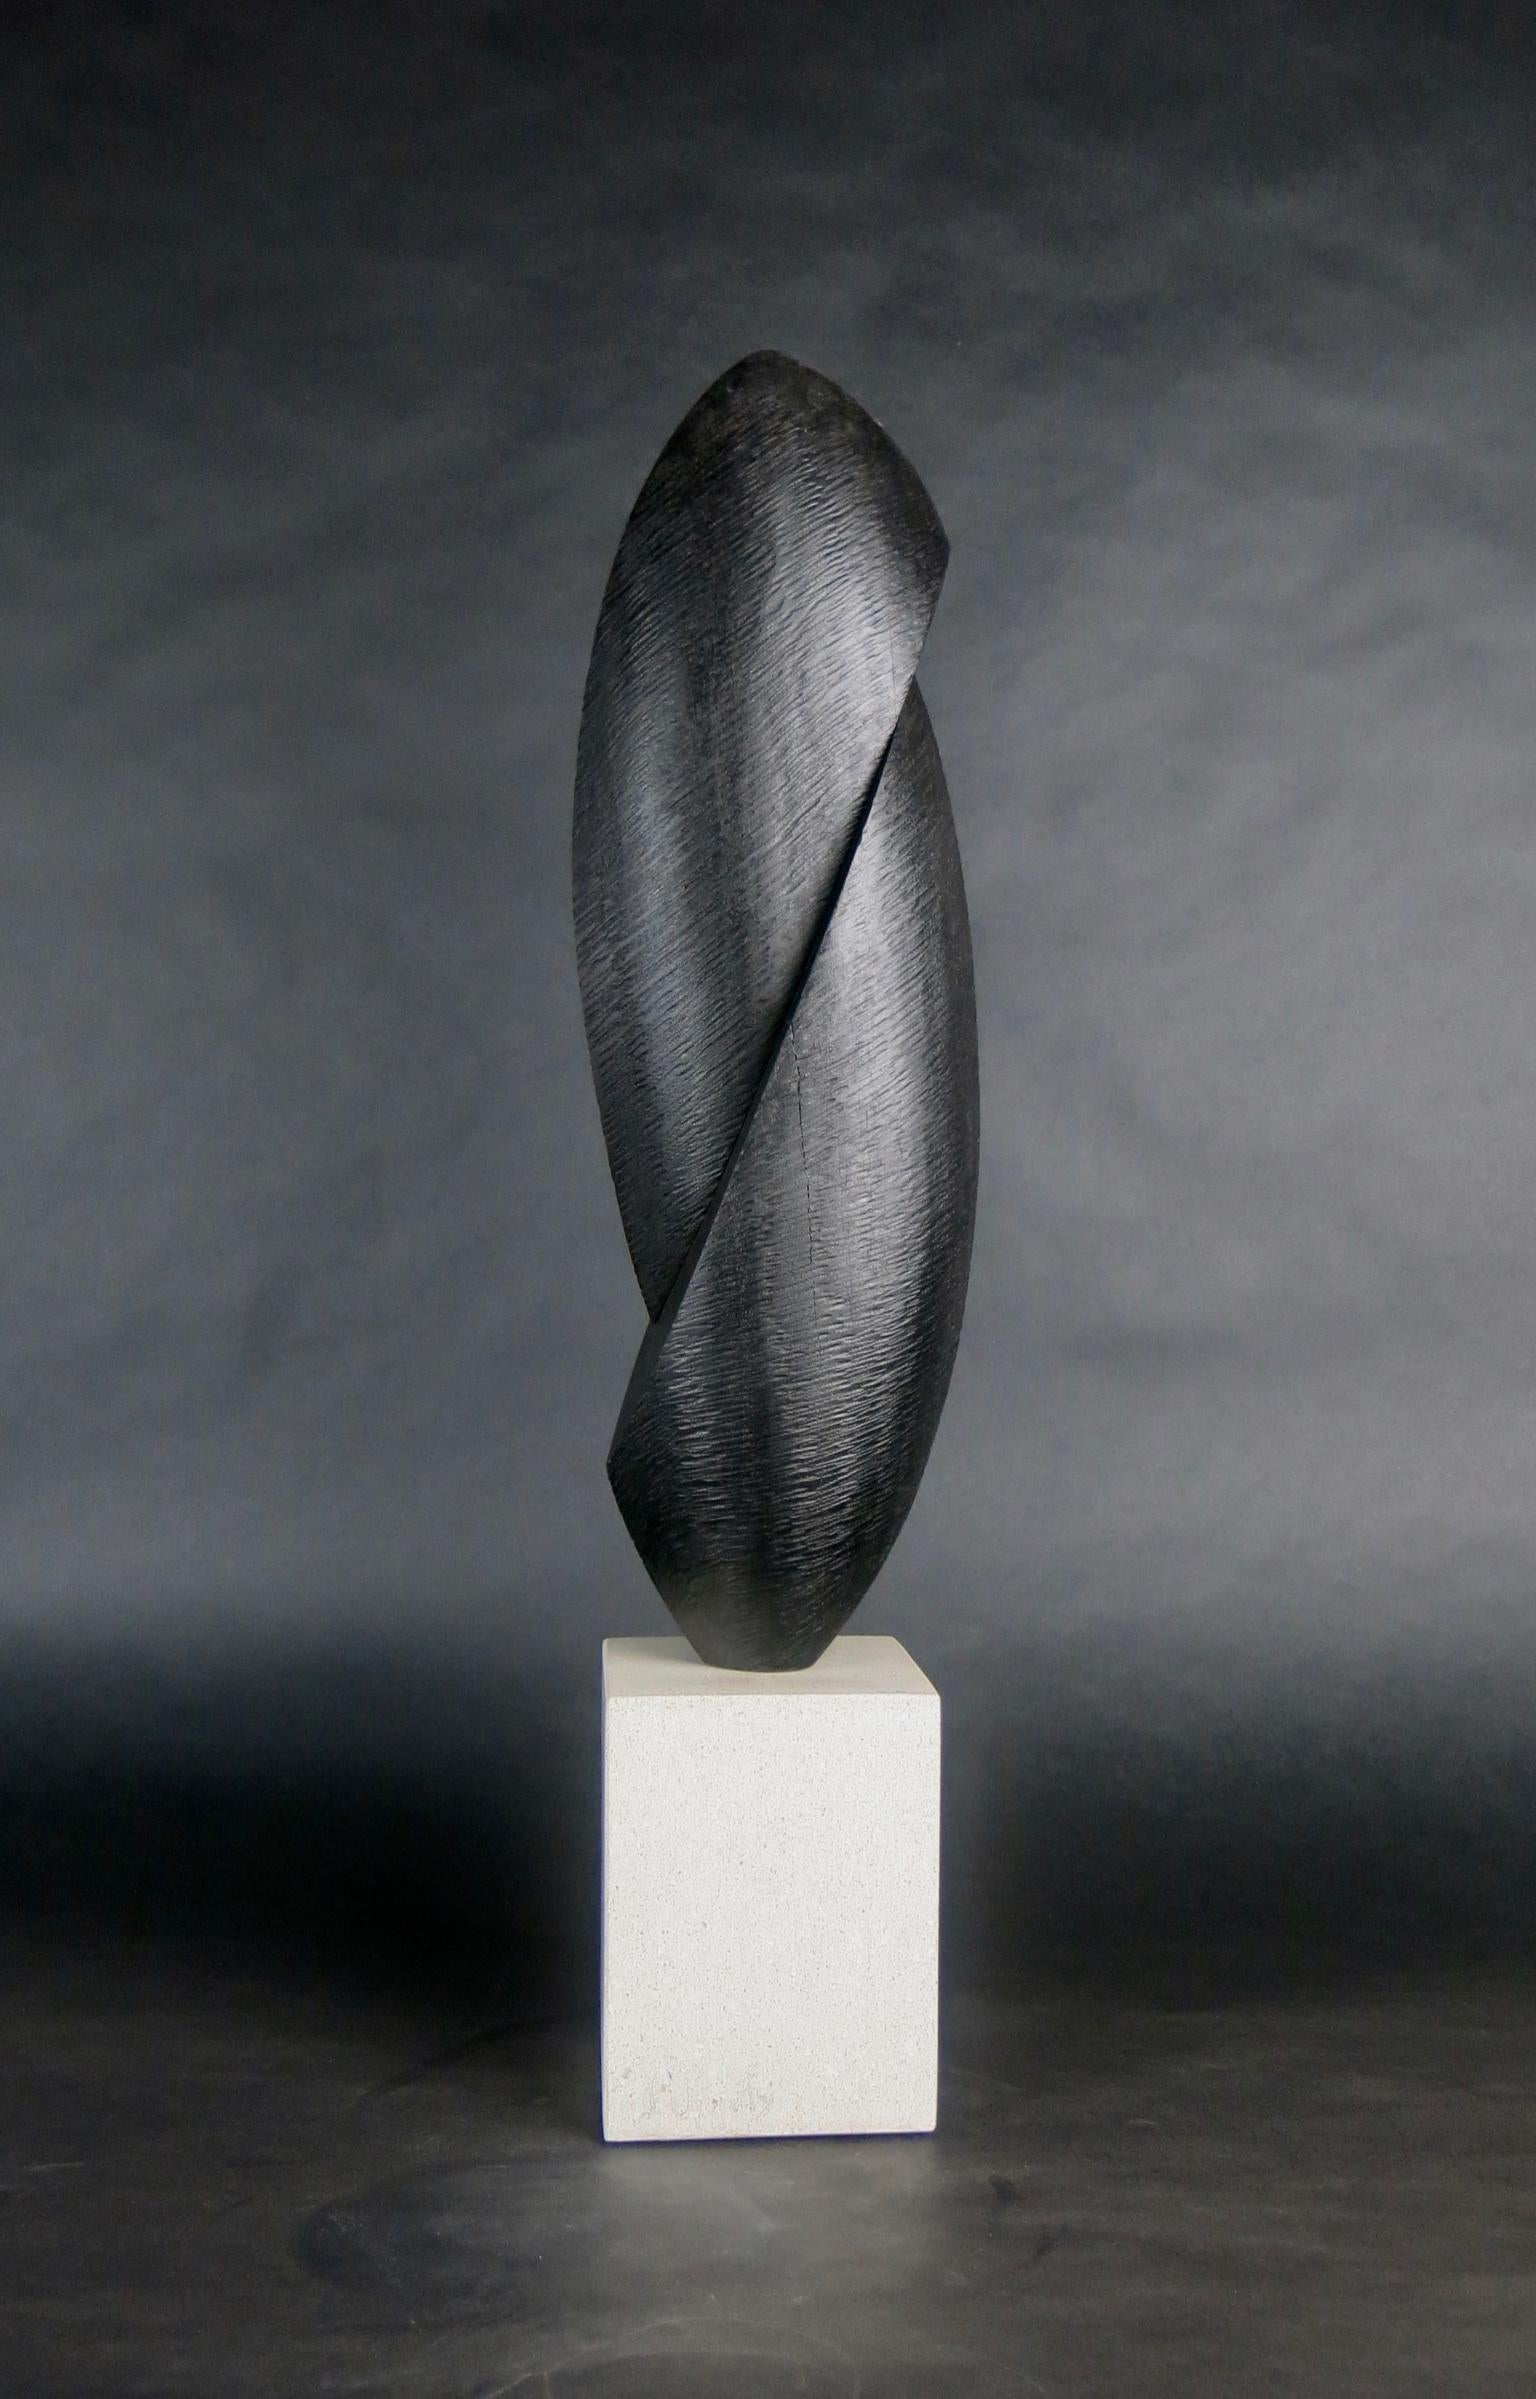 Mahogany, dye, lacquer, concrete

As an artist I strive to create elegant sculptures that capture the true essence of the subject matter. Form, line and surface are used as the visual language. The figure is abstracted to a minimalist form, void of